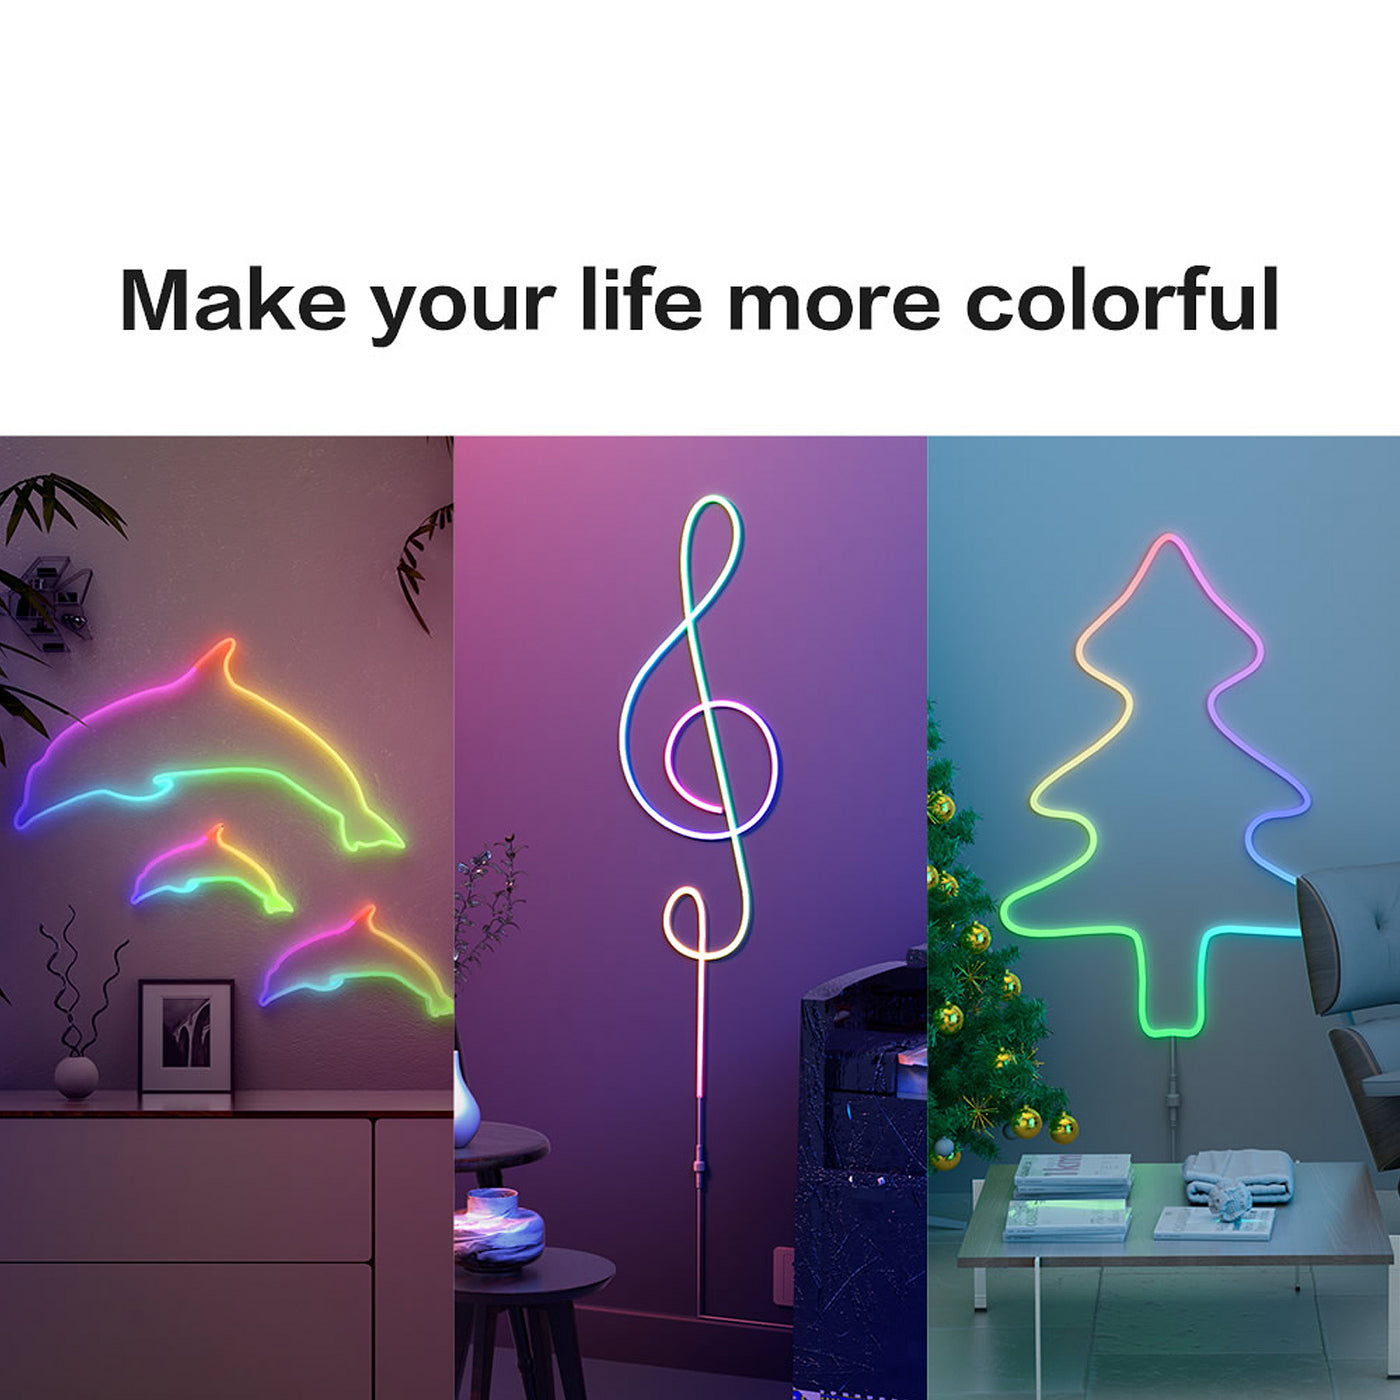 RGBIC Neon Rope Light, 16.4ft LED Strip Lights, Music Sync, DIY Design, Neon Lights for Gaming Room Living Bedroom Wall Decor